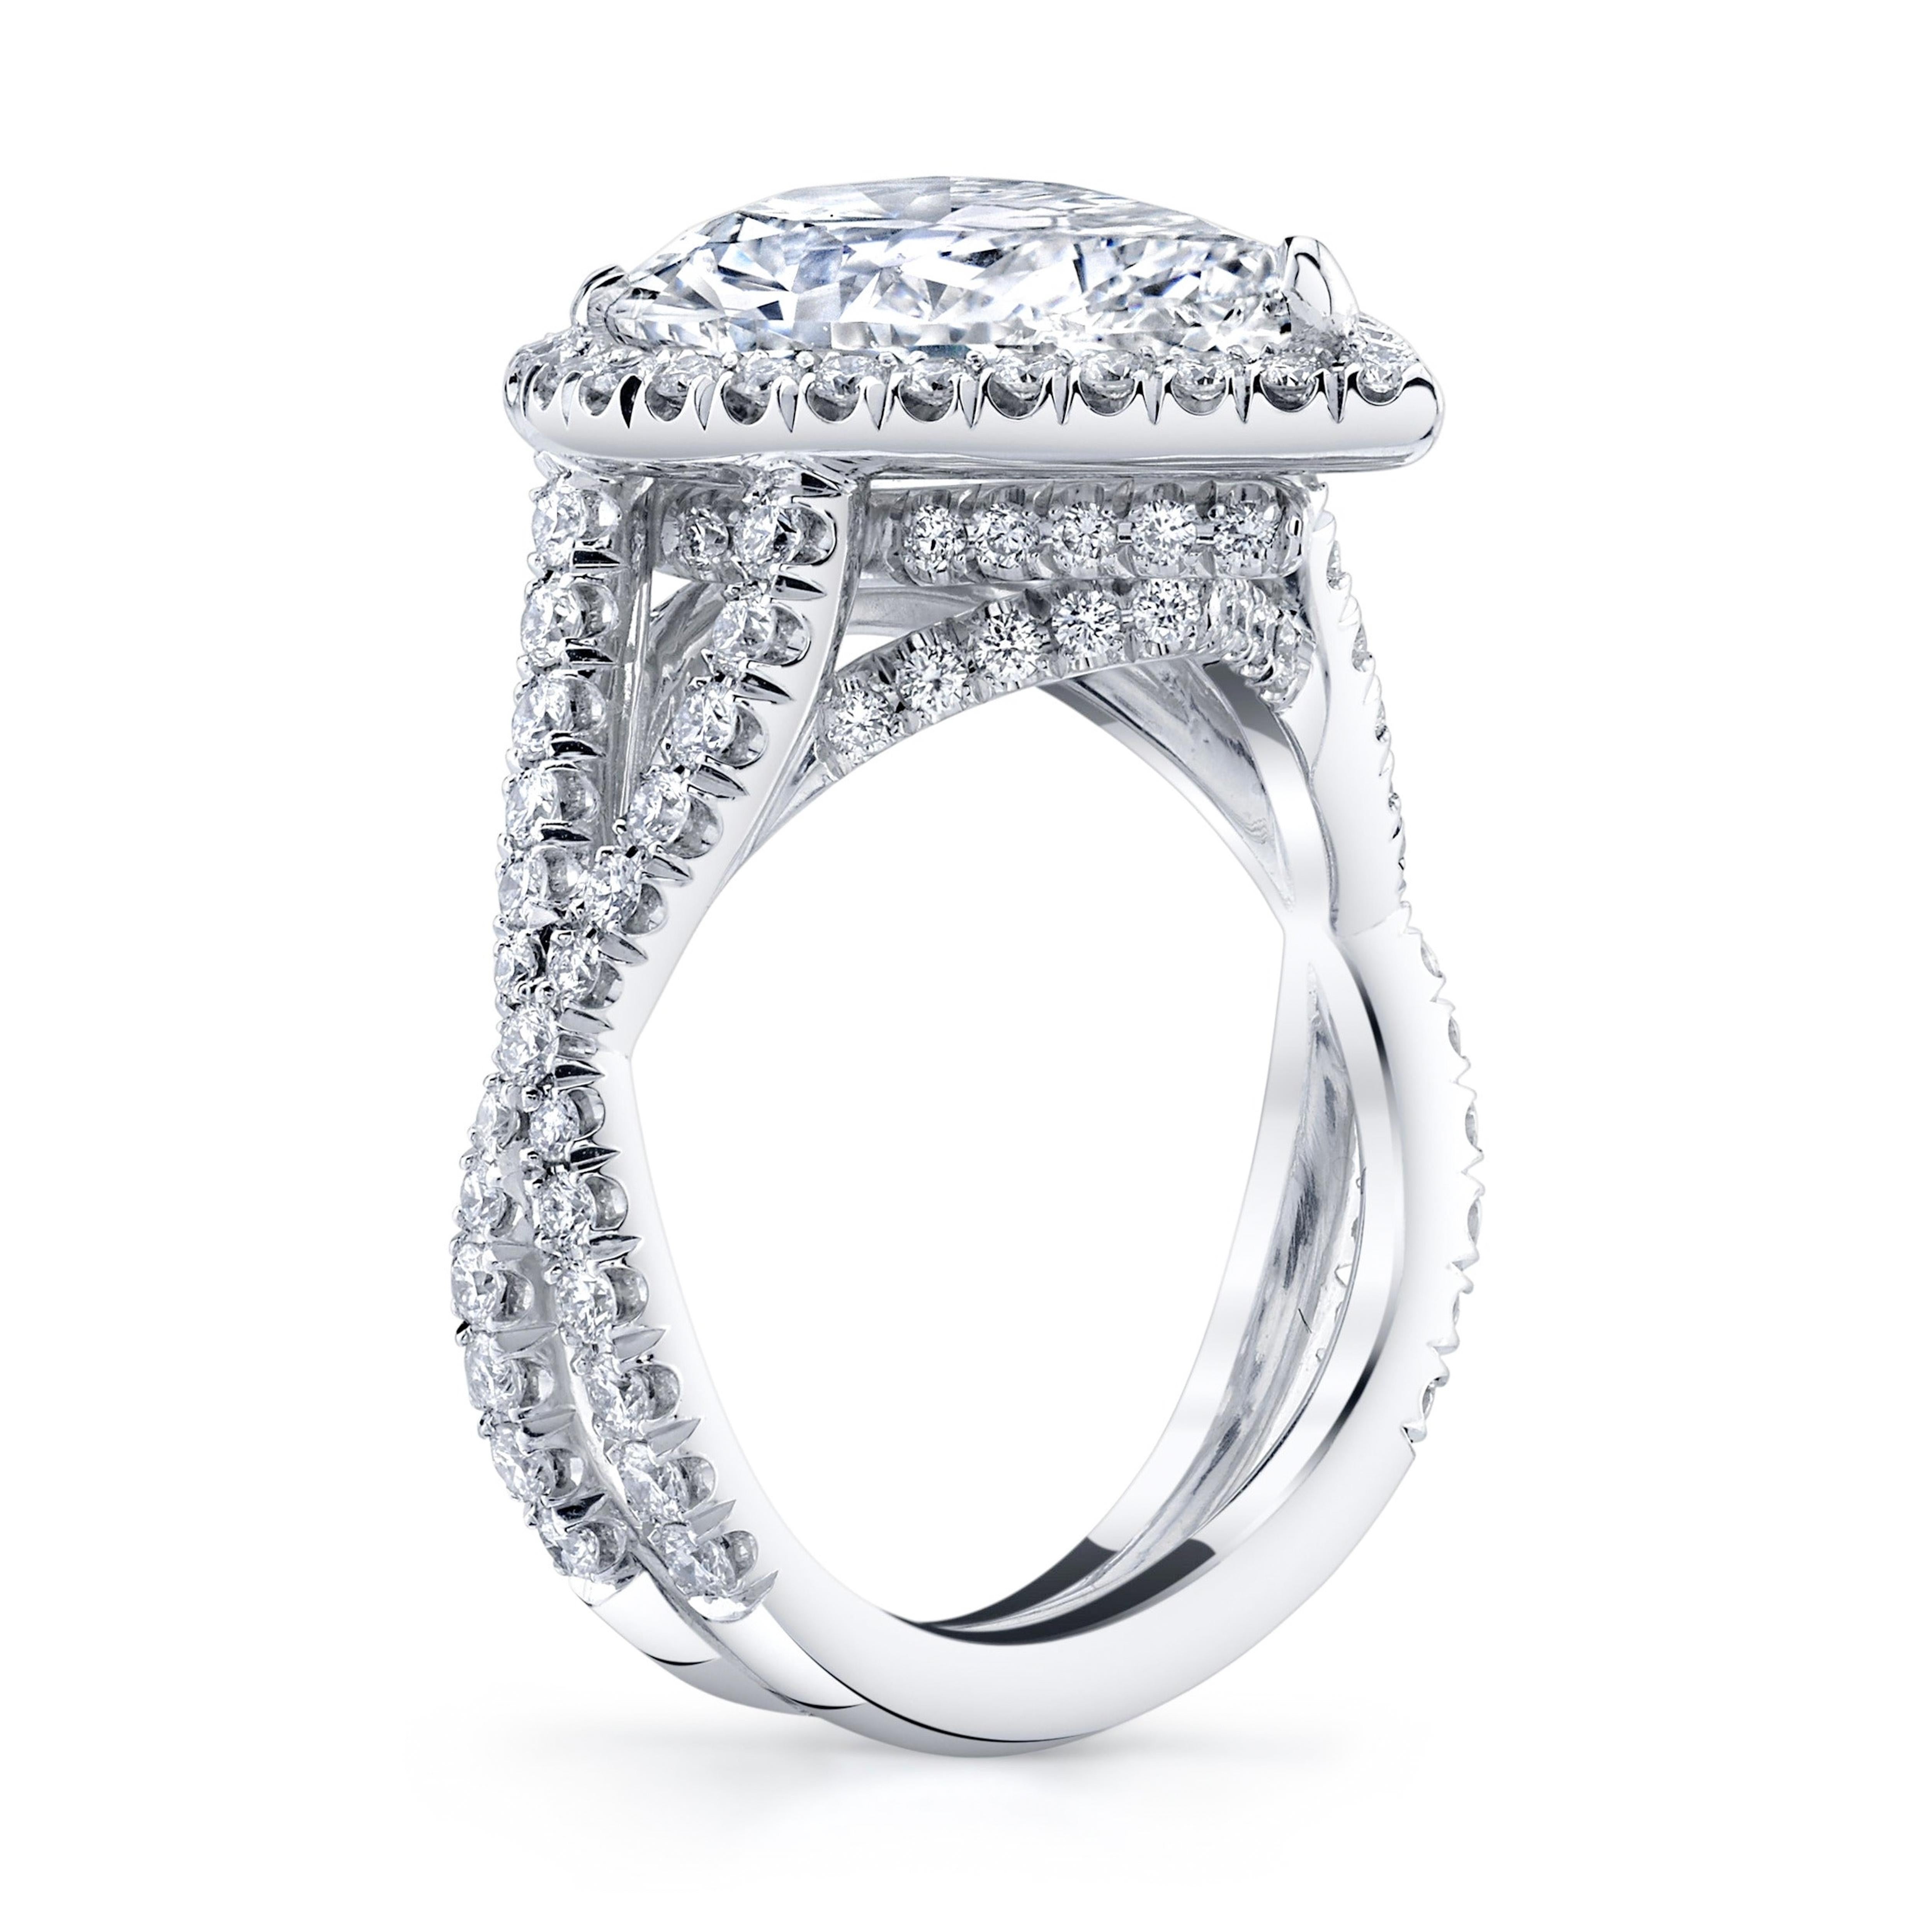 A gorgeous and proportioned 3.21 ct. GIA-certified E color, SI2 clarity, Pear Shape diamond is complemented by an open crisscrossed, double shank encrusted with 115 colorless rounds weighing 1.08 carat total. 
This Platinum ring has a total weight